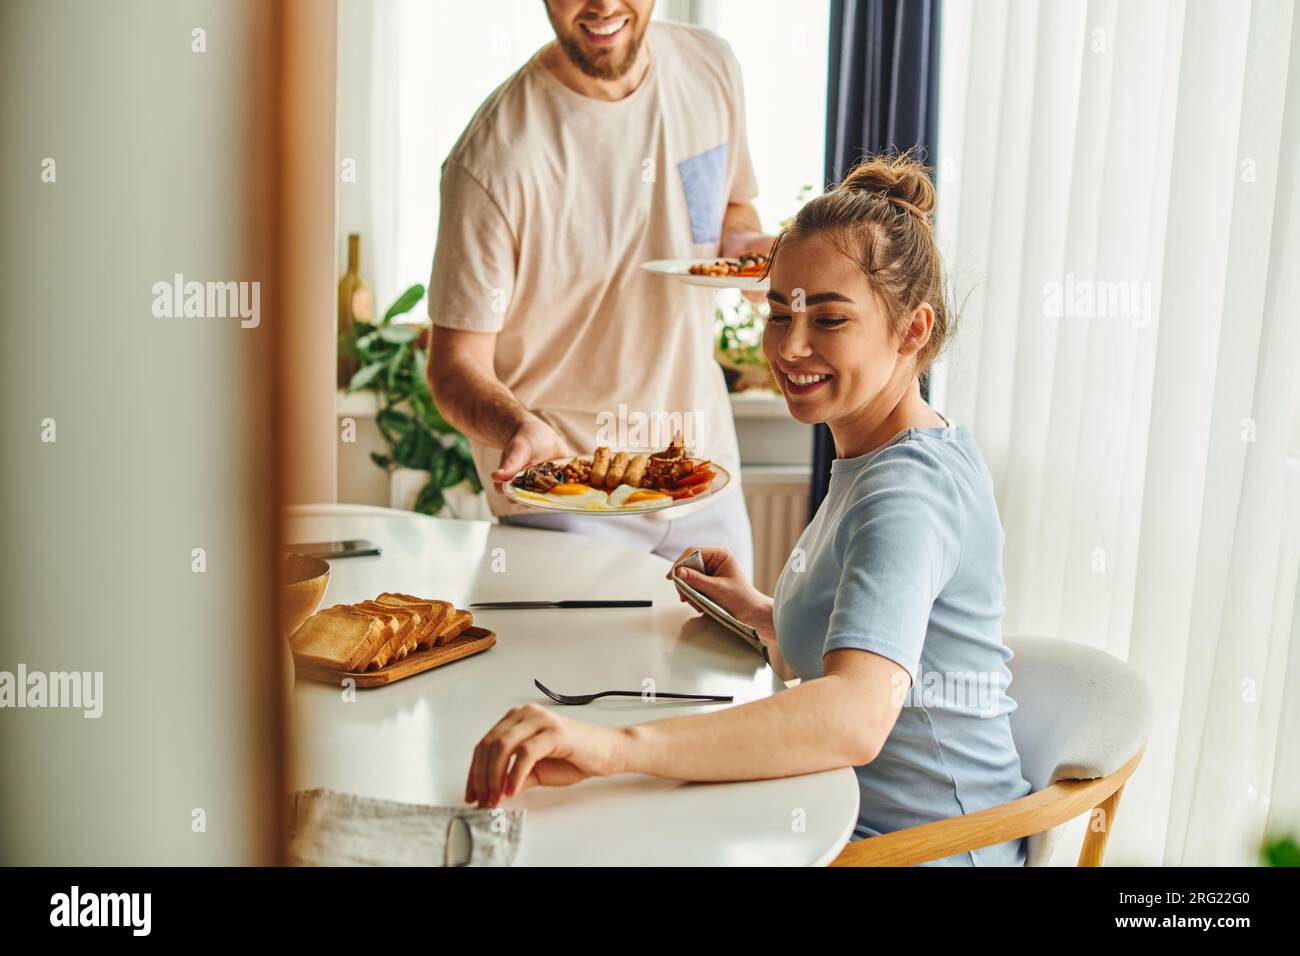 Smiling woman sitting near cutlery and blurred boyfriend holding tasty breakfast at home in morning Stock Photo